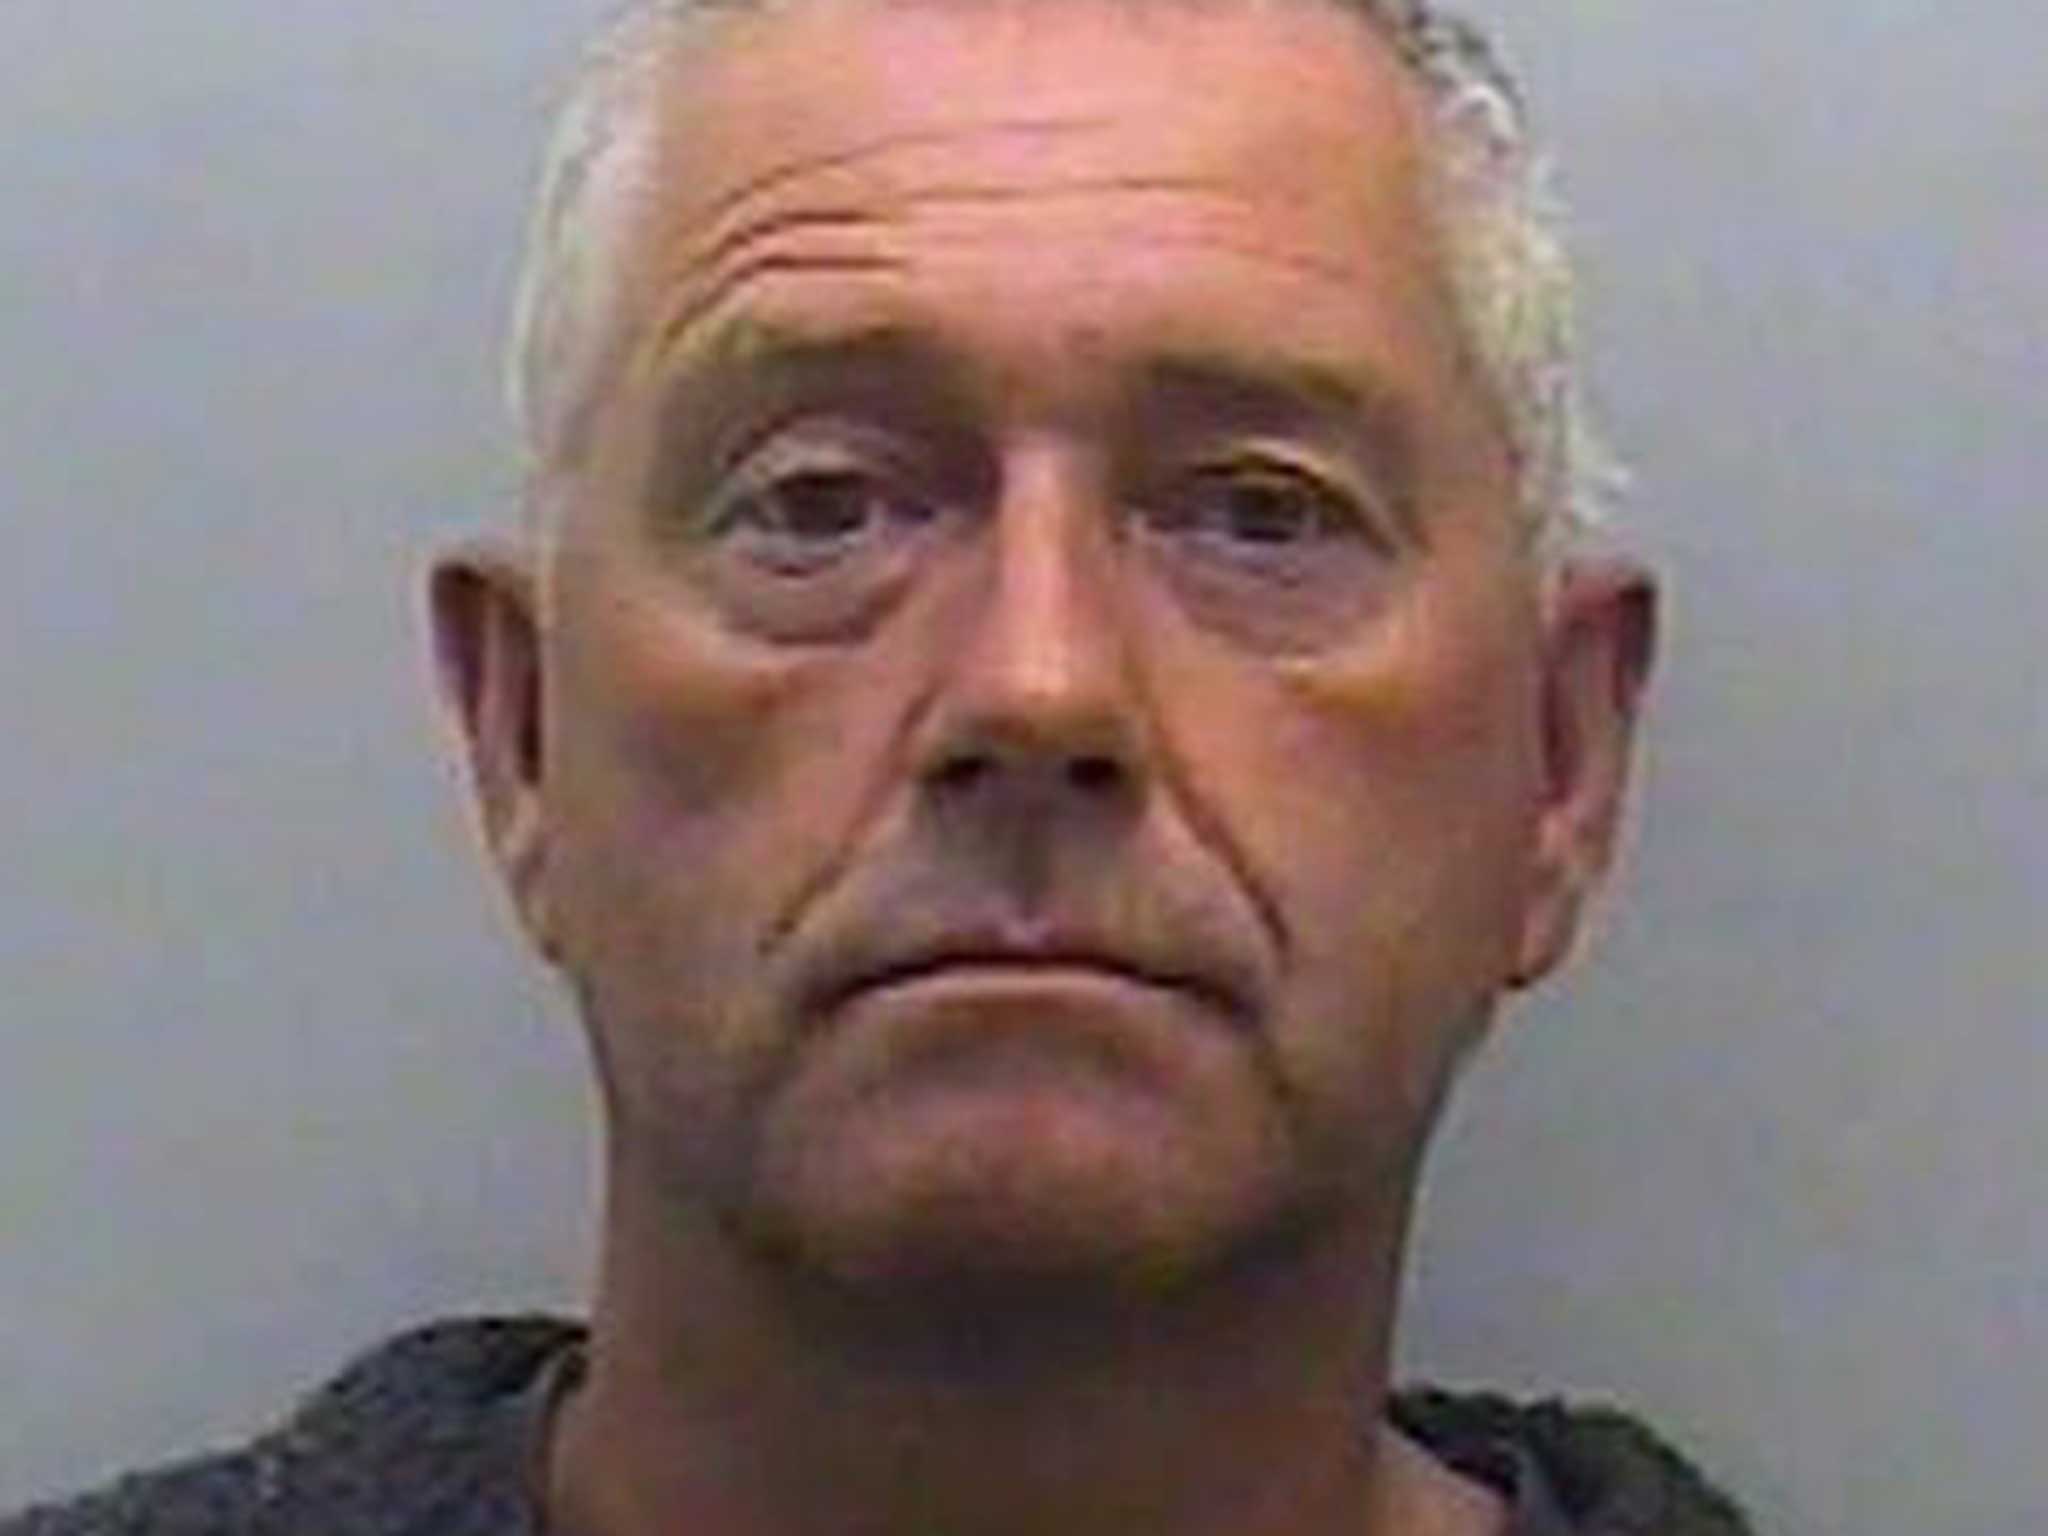 Jonathan Thomson-Glover, 53, was jailed for three years and nine months for filming pupils naked over a 17-year period at Clifton College